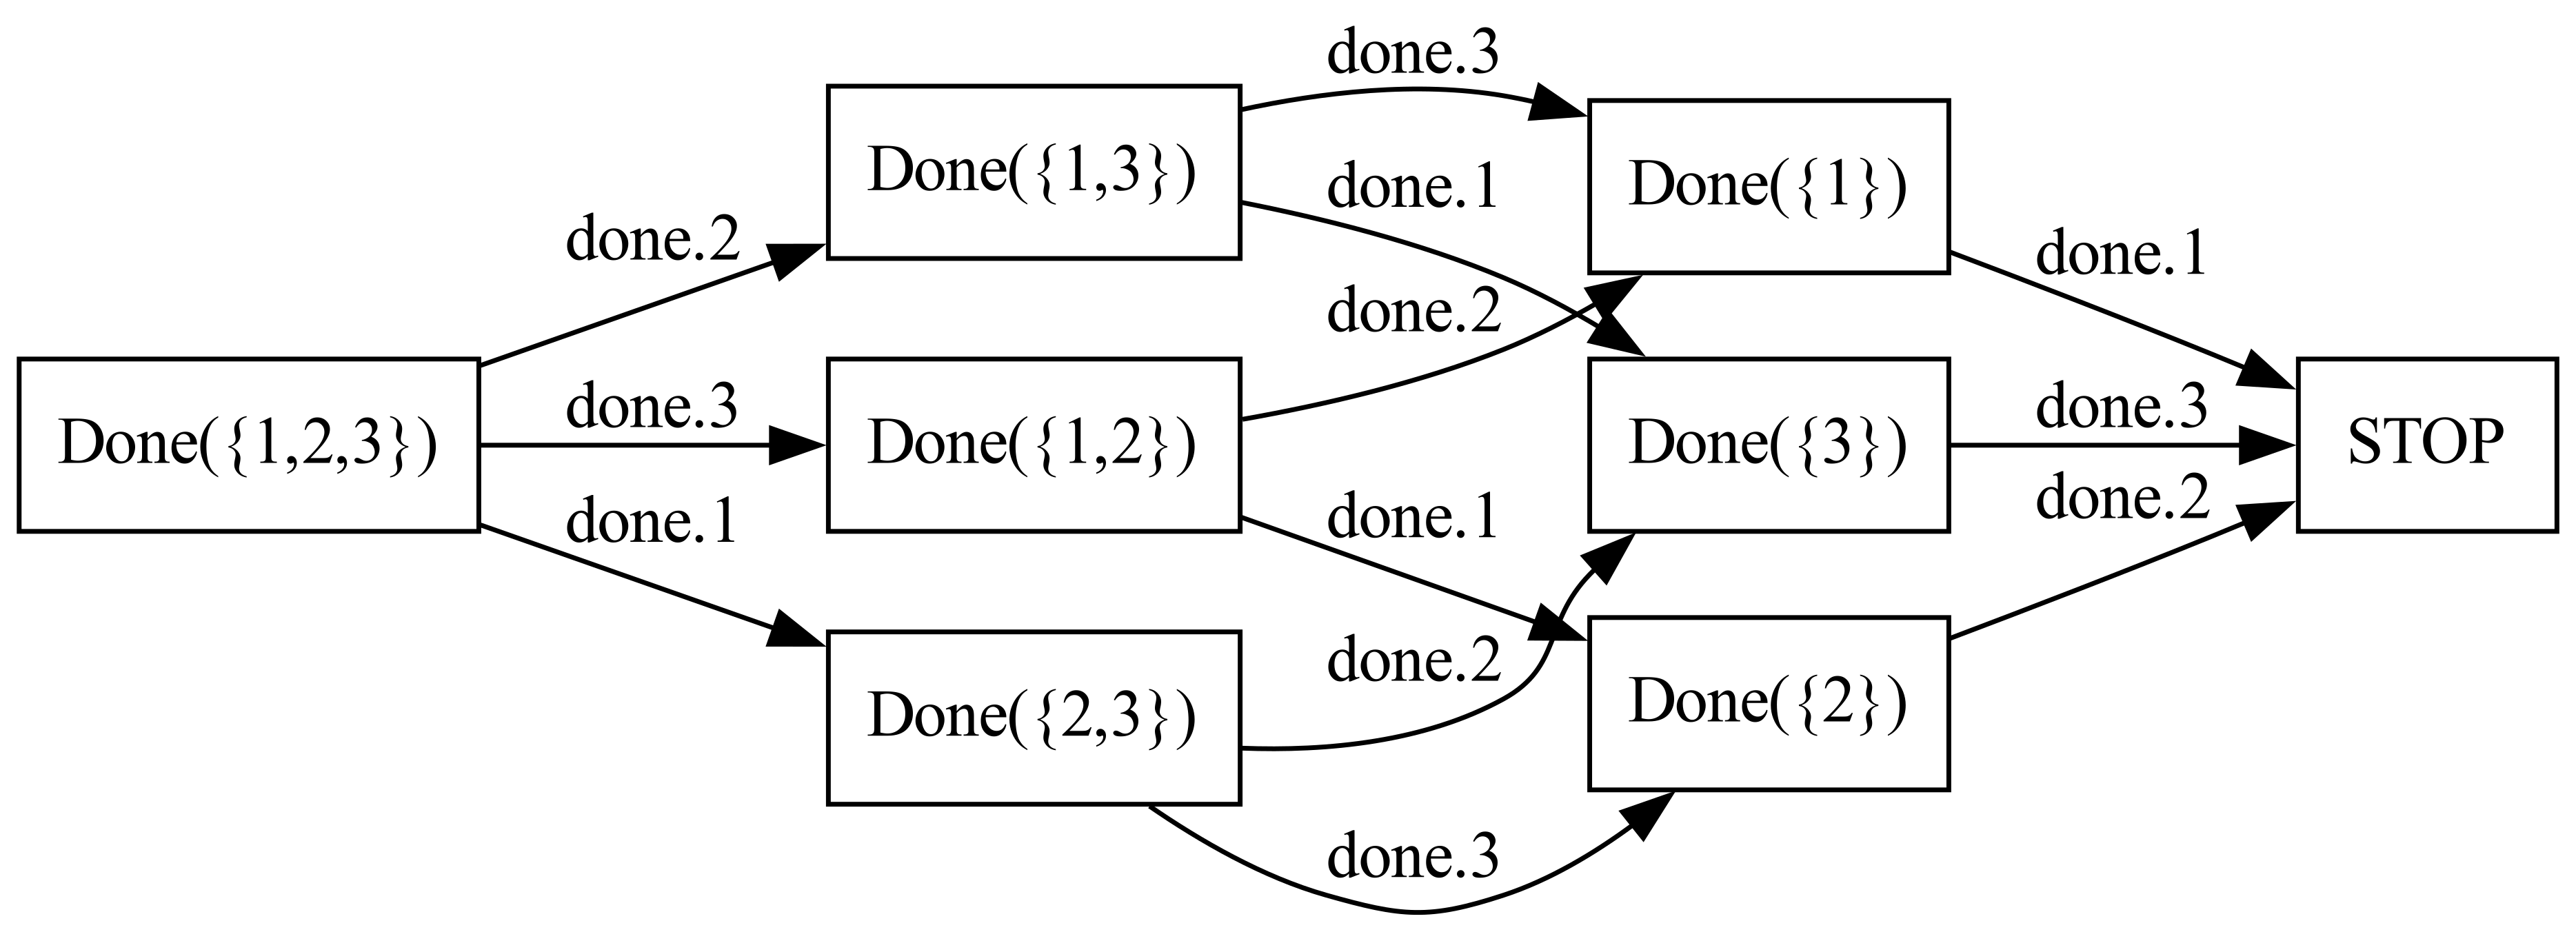 expansion of Done({1,2,3})